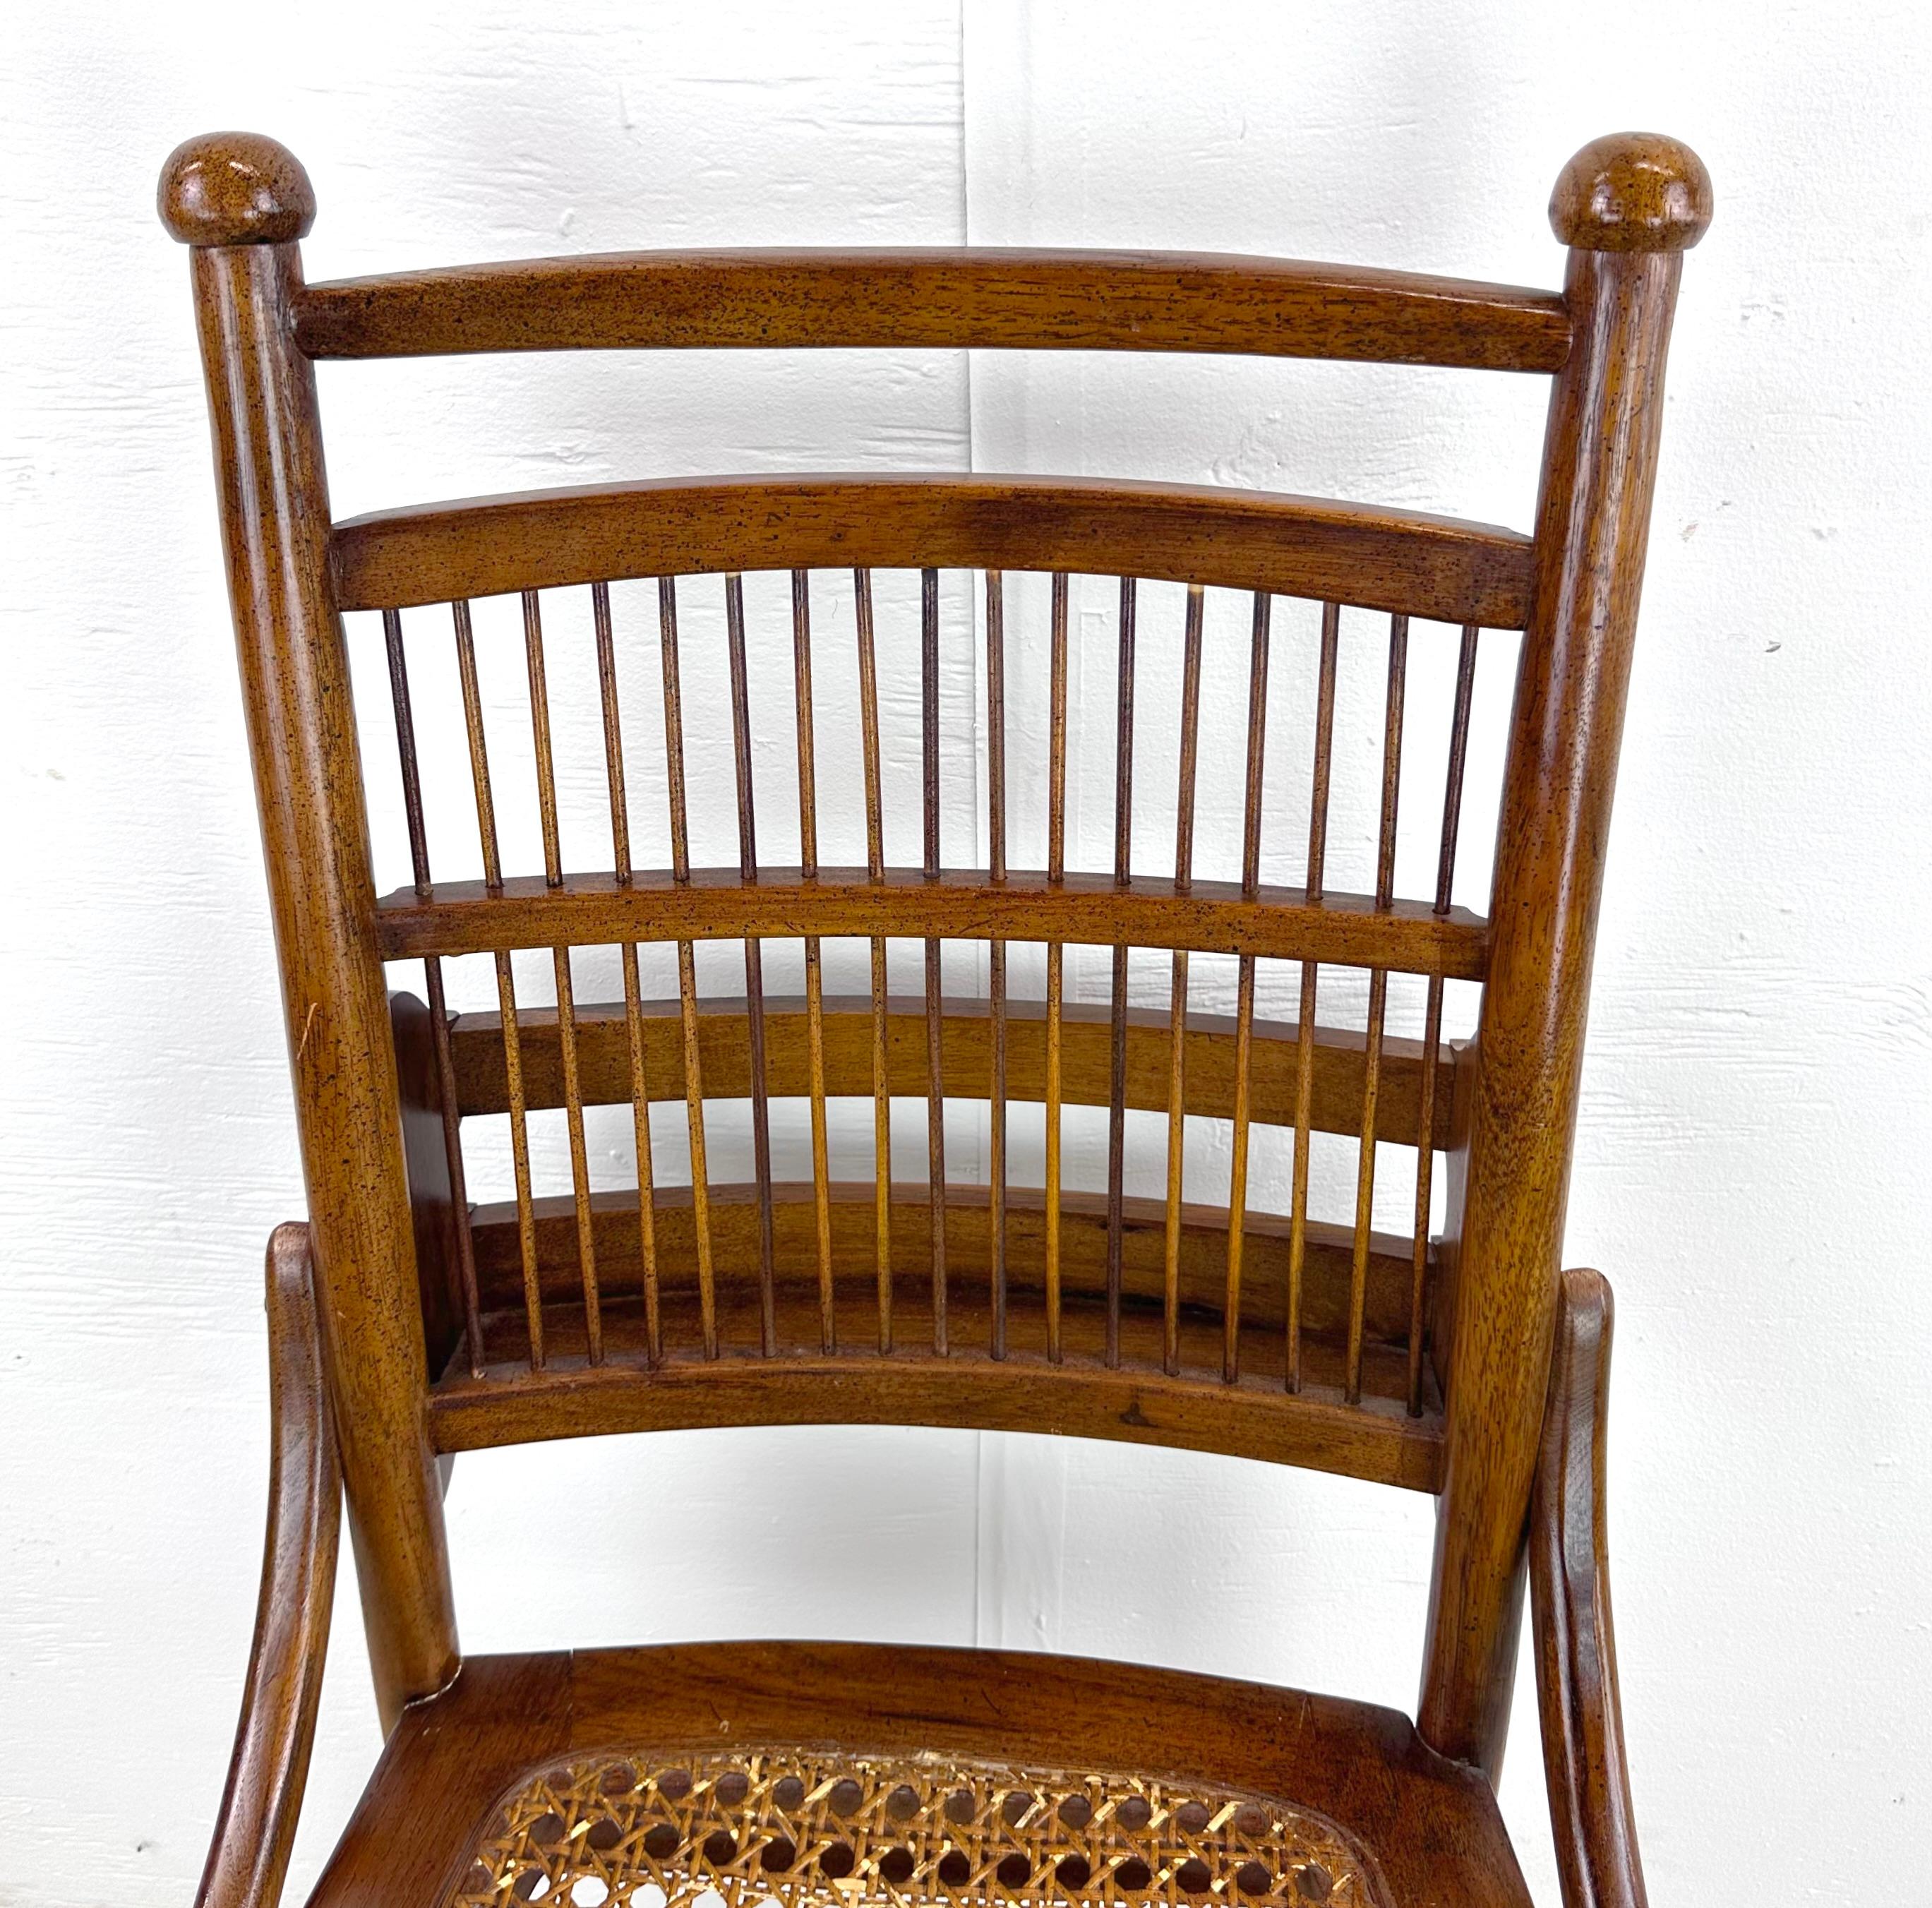 antique wooden chairs with cane seats